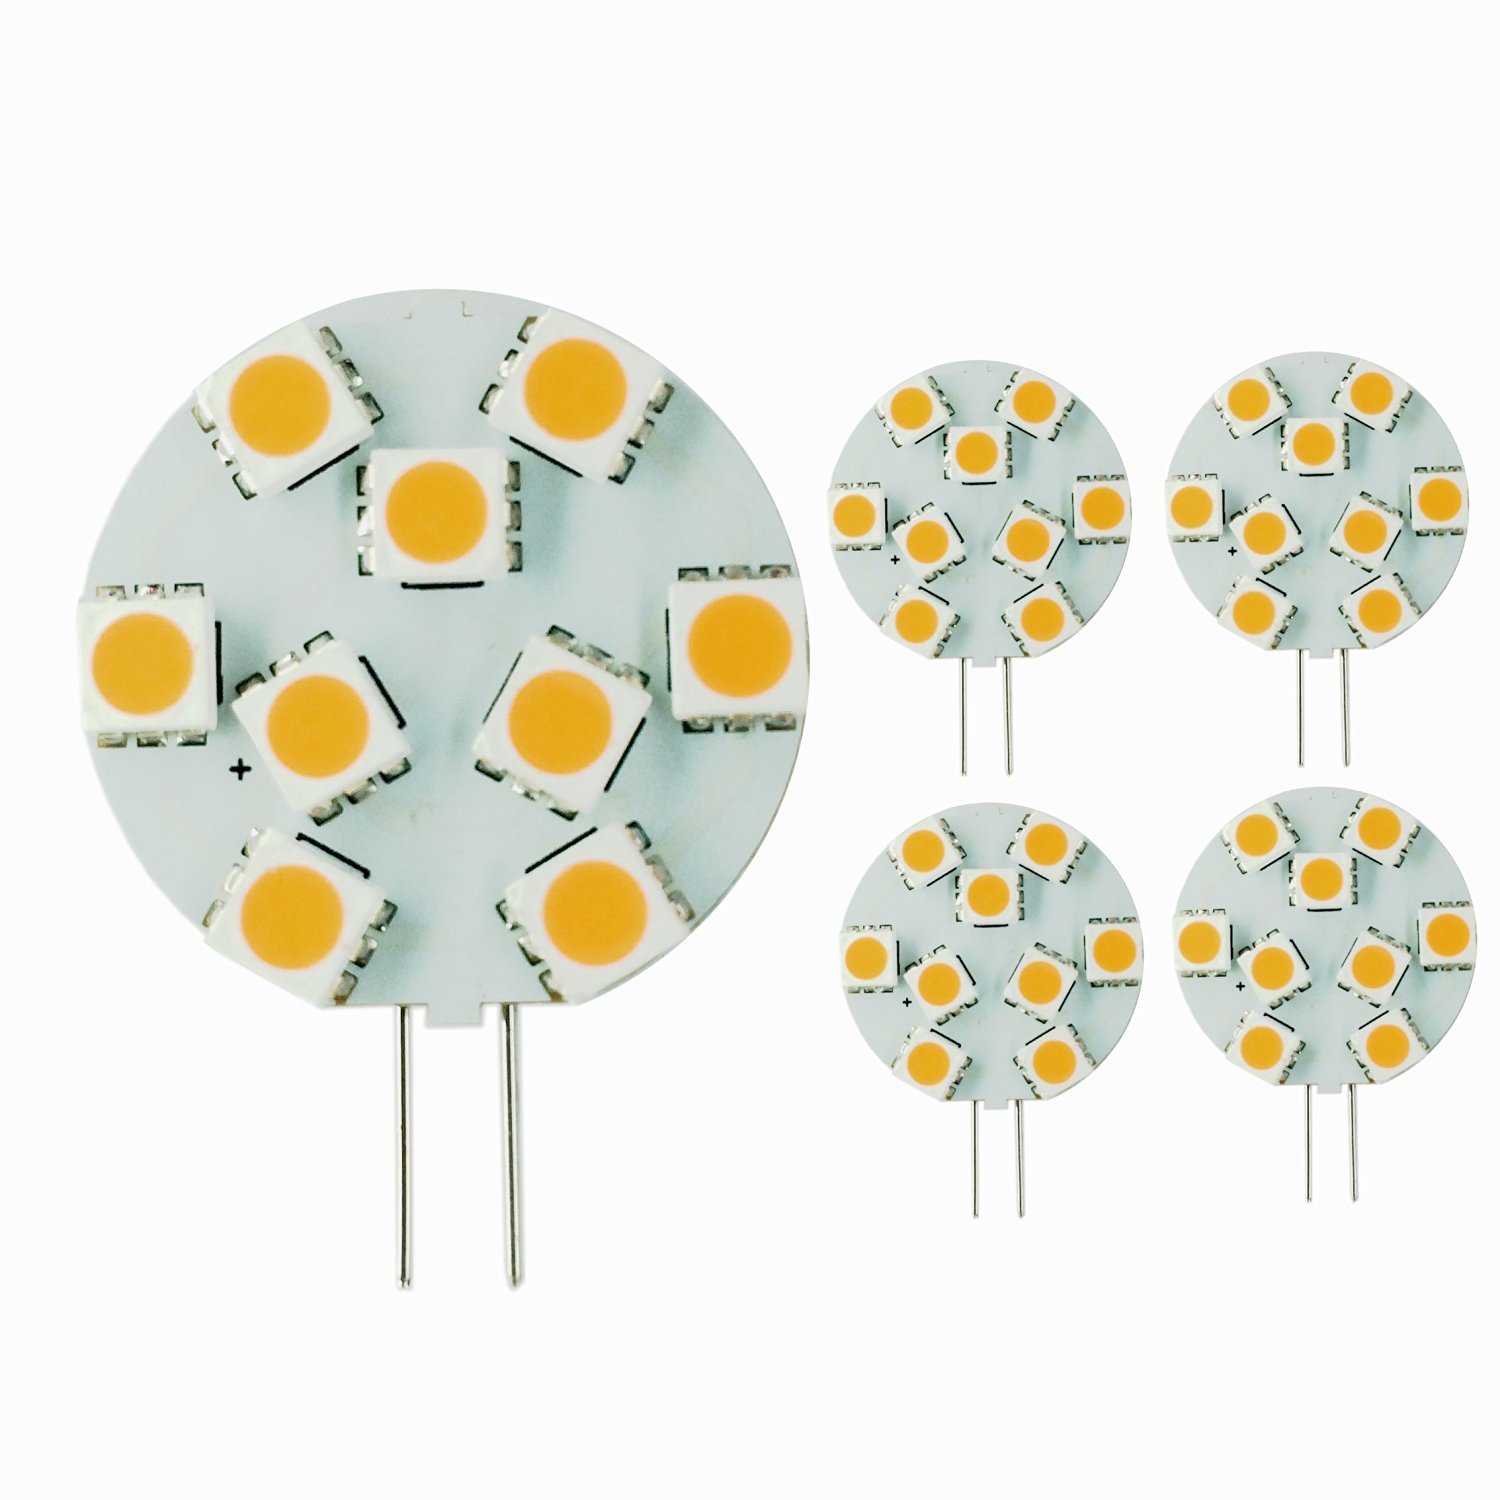 lighteu 5X 2W G4 LED Unidirectional Capsule LED Bulbs, 9X 5050 SMD LED Non-Dimmable (Warm White) von lighteu